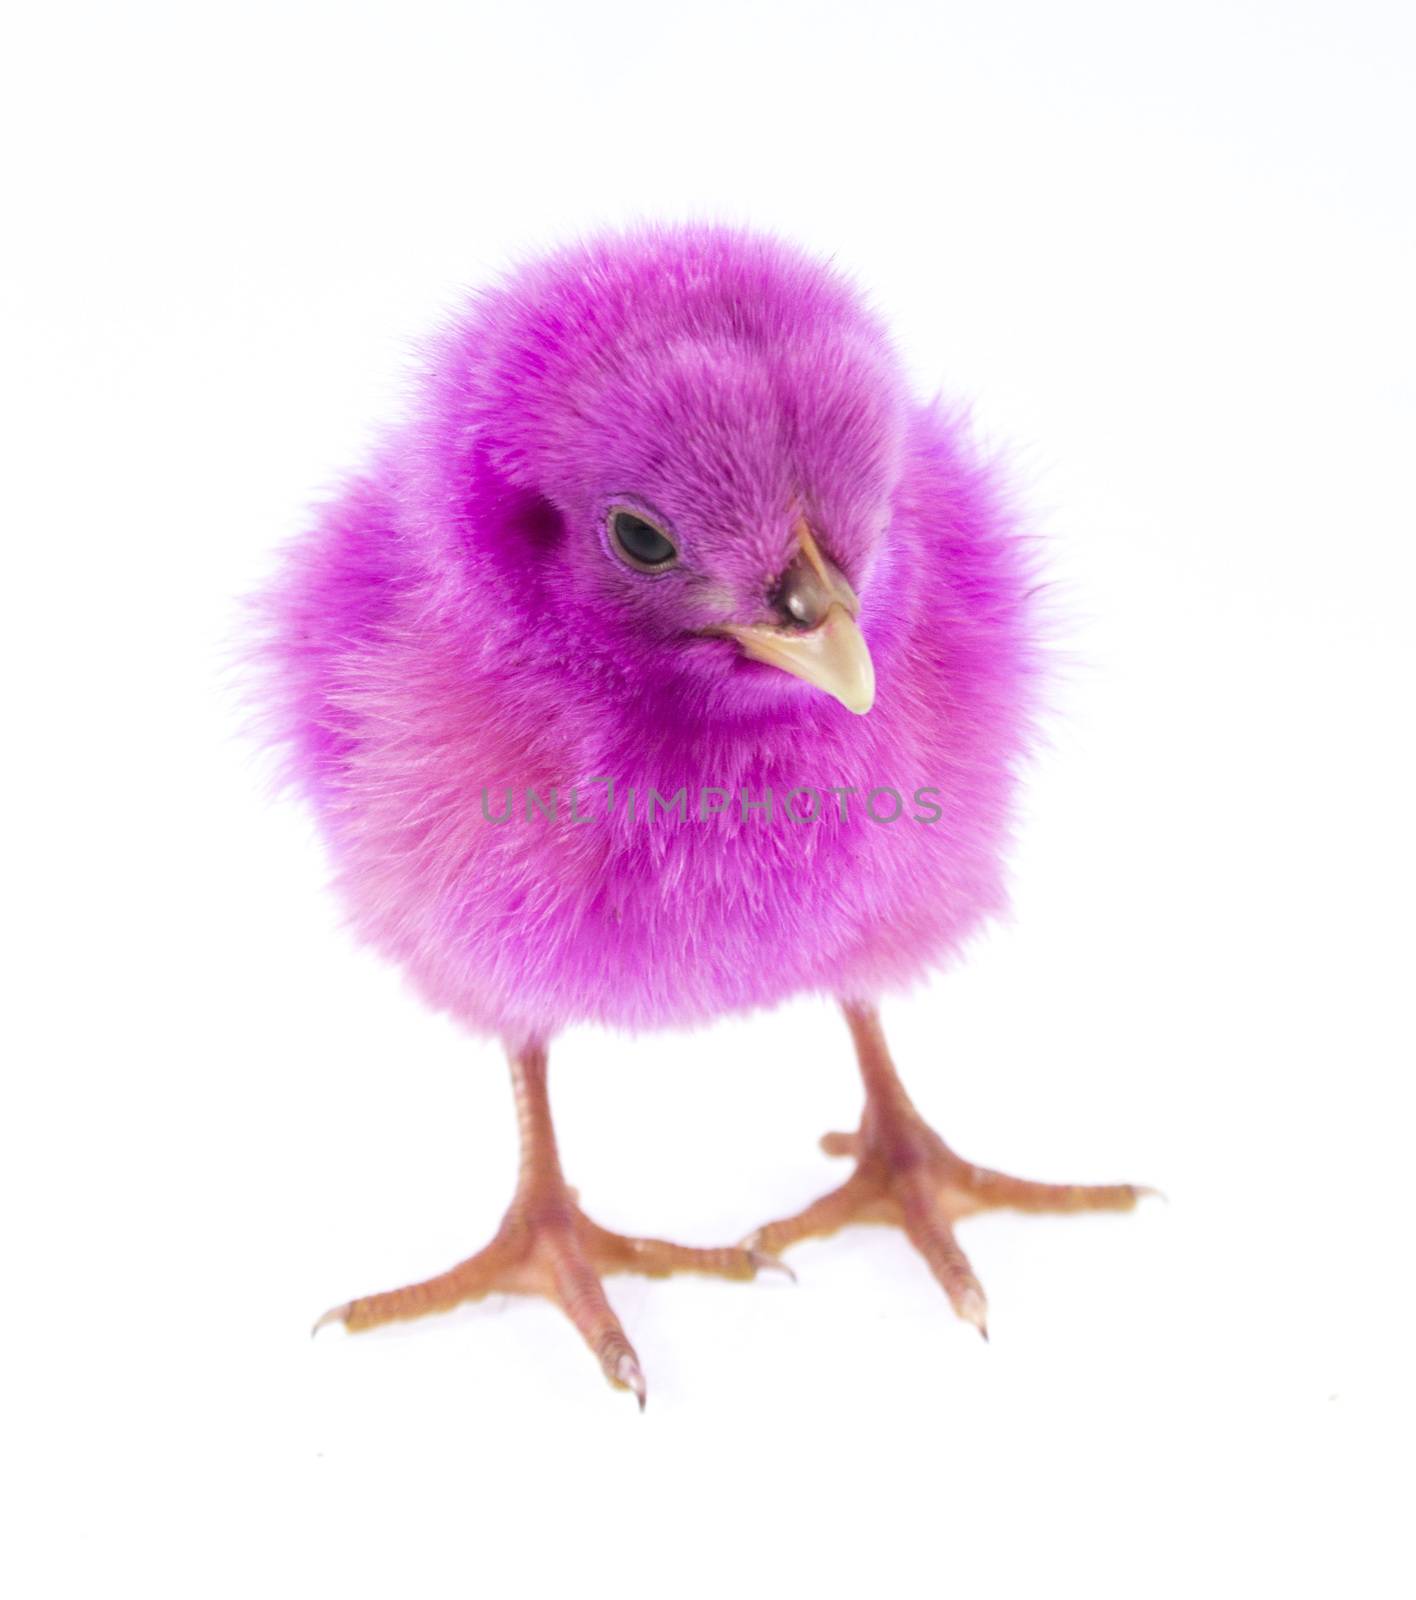 live little pink chicken animal isolated on white background